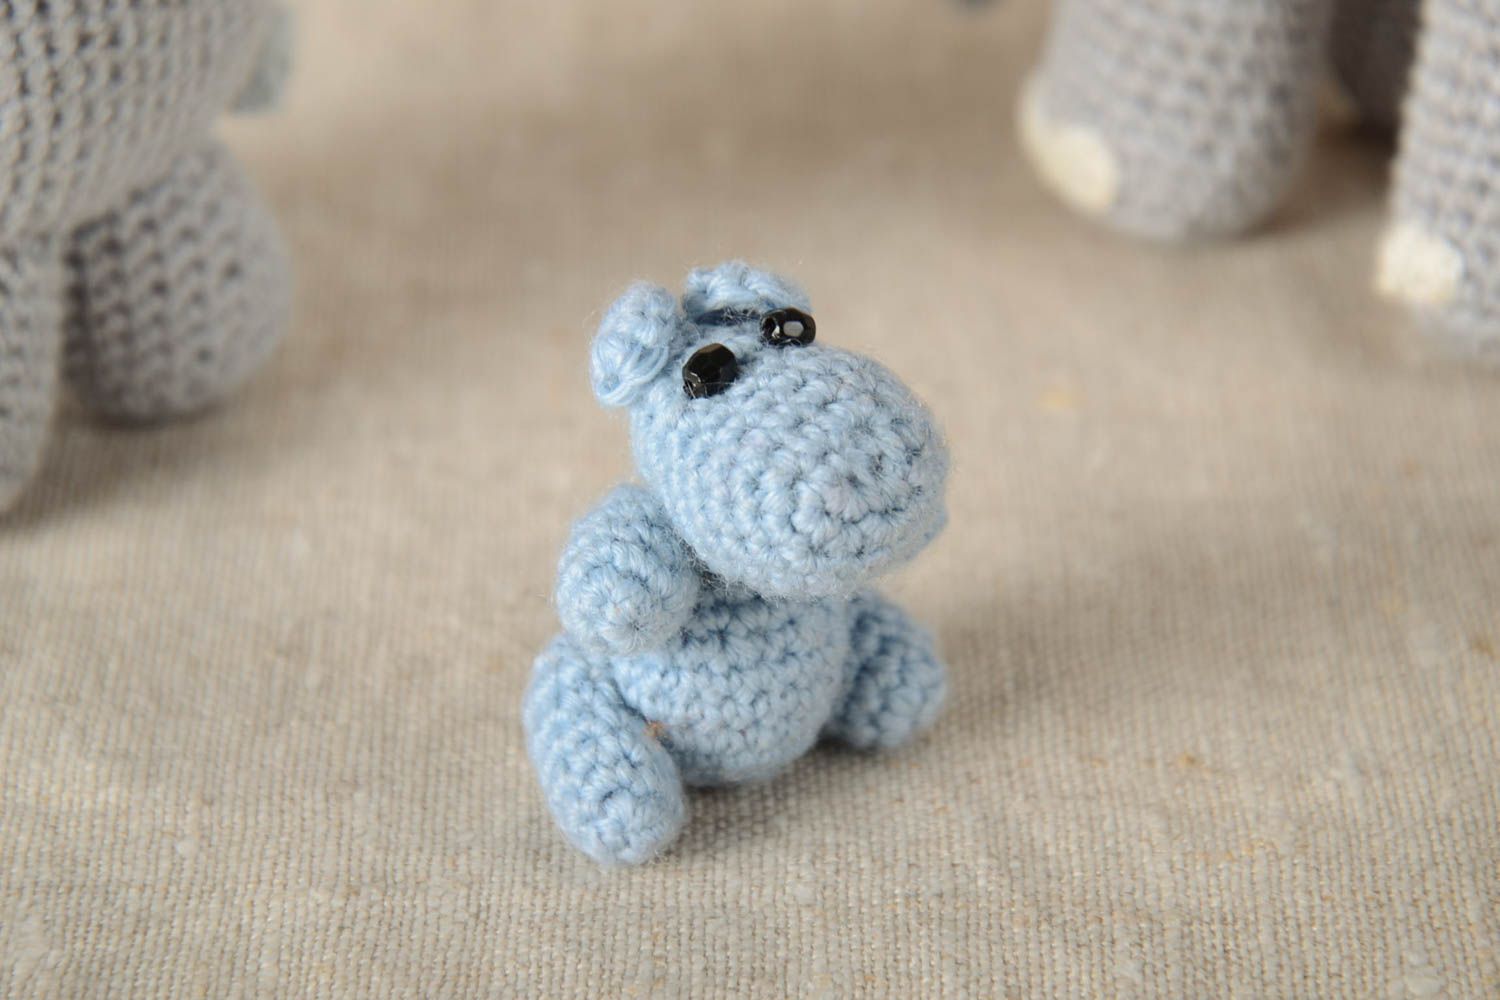 Handmade toy designer toy crocheted toy animal toy gift for baby decor ideas photo 1